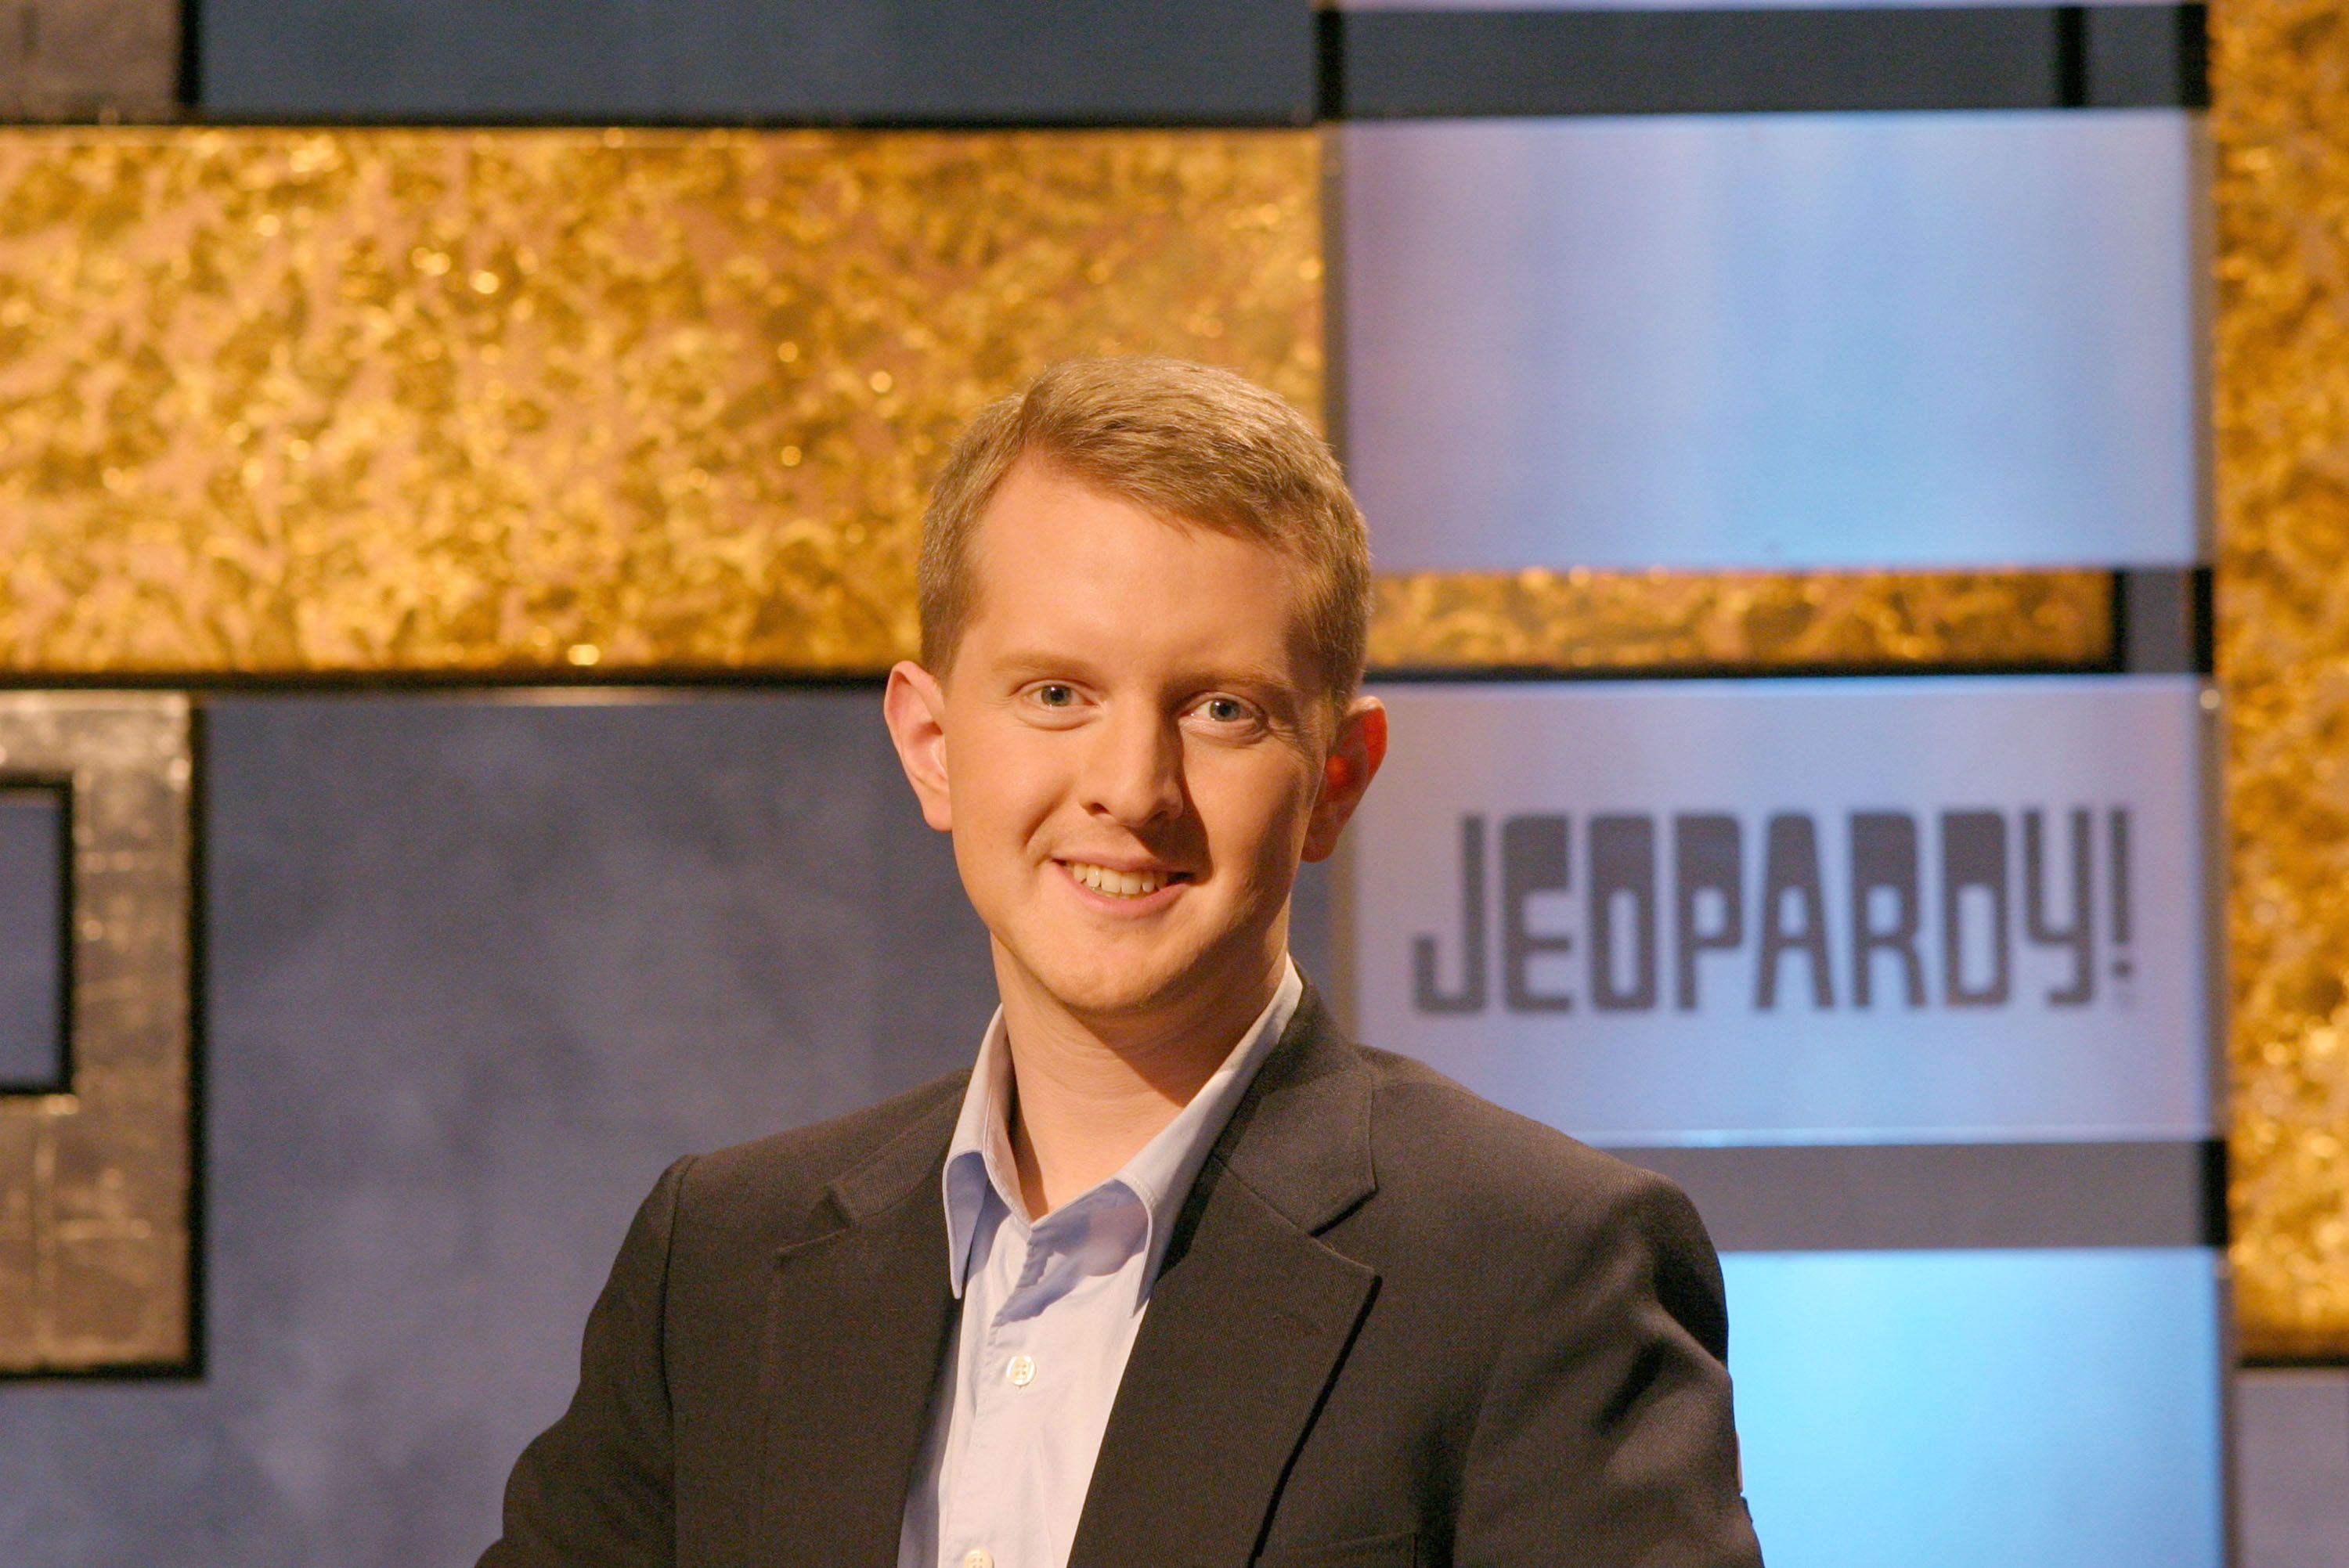 Ken Jennings on the set of "Jeopardy!" on an episode broadcast on November 30, 2004. | Photo: Getty Images